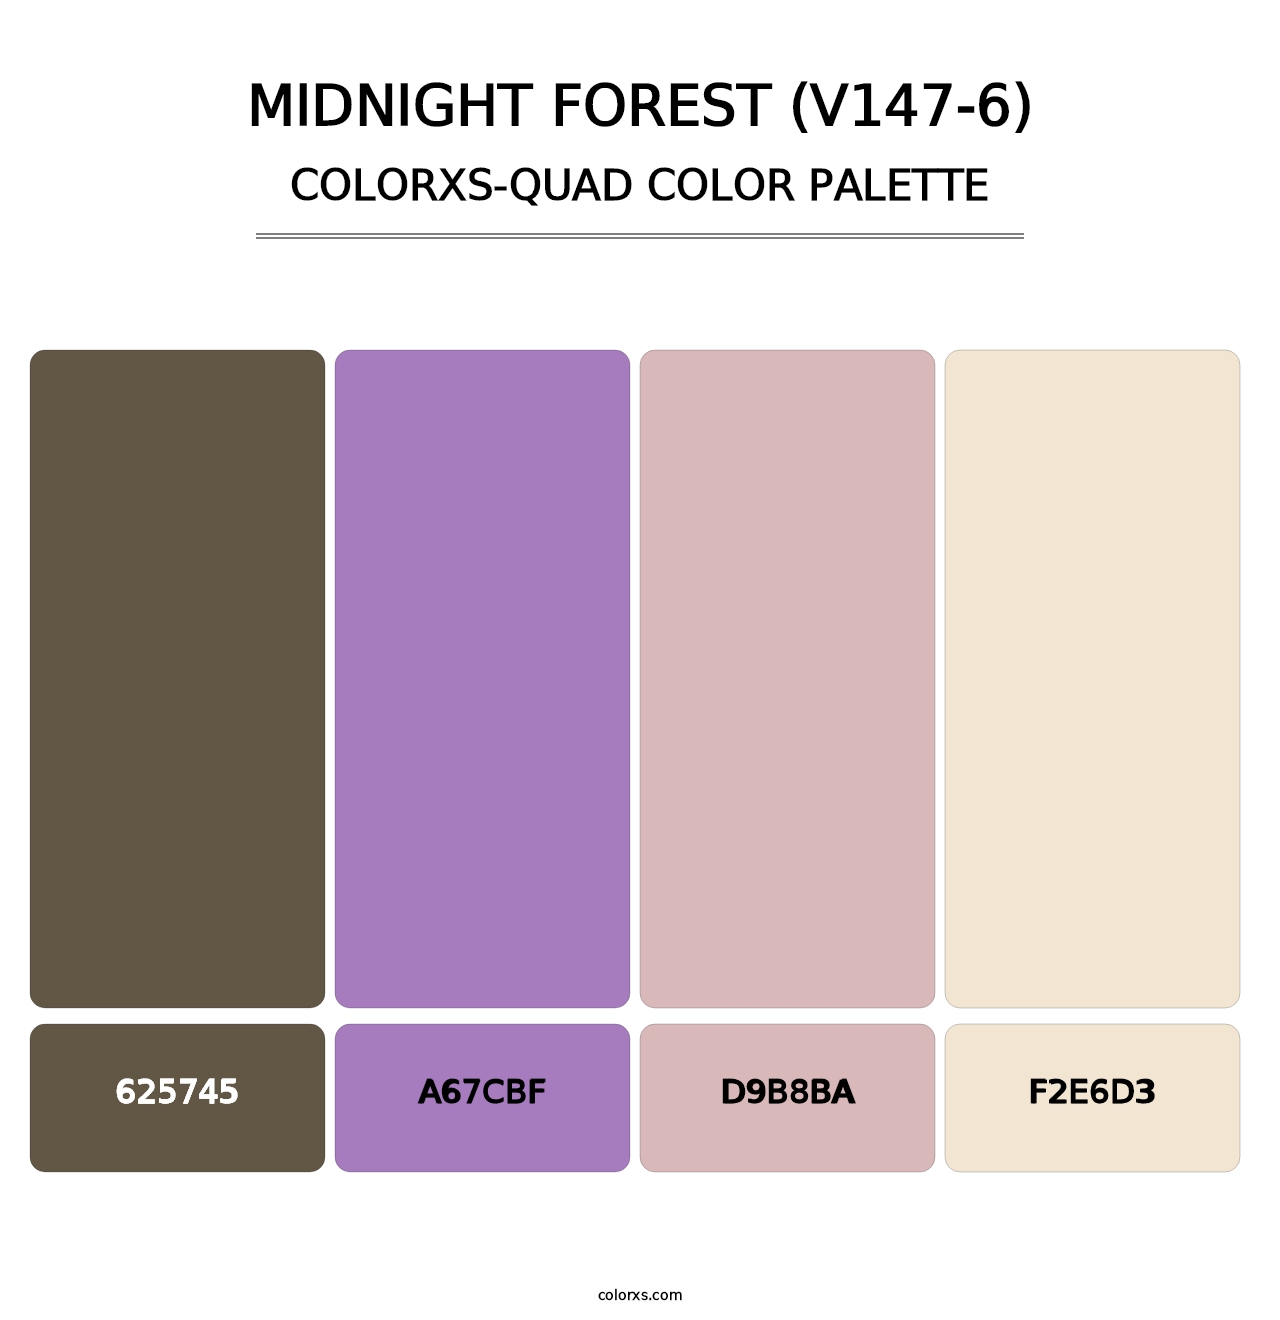 Midnight Forest (V147-6) - Colorxs Quad Palette